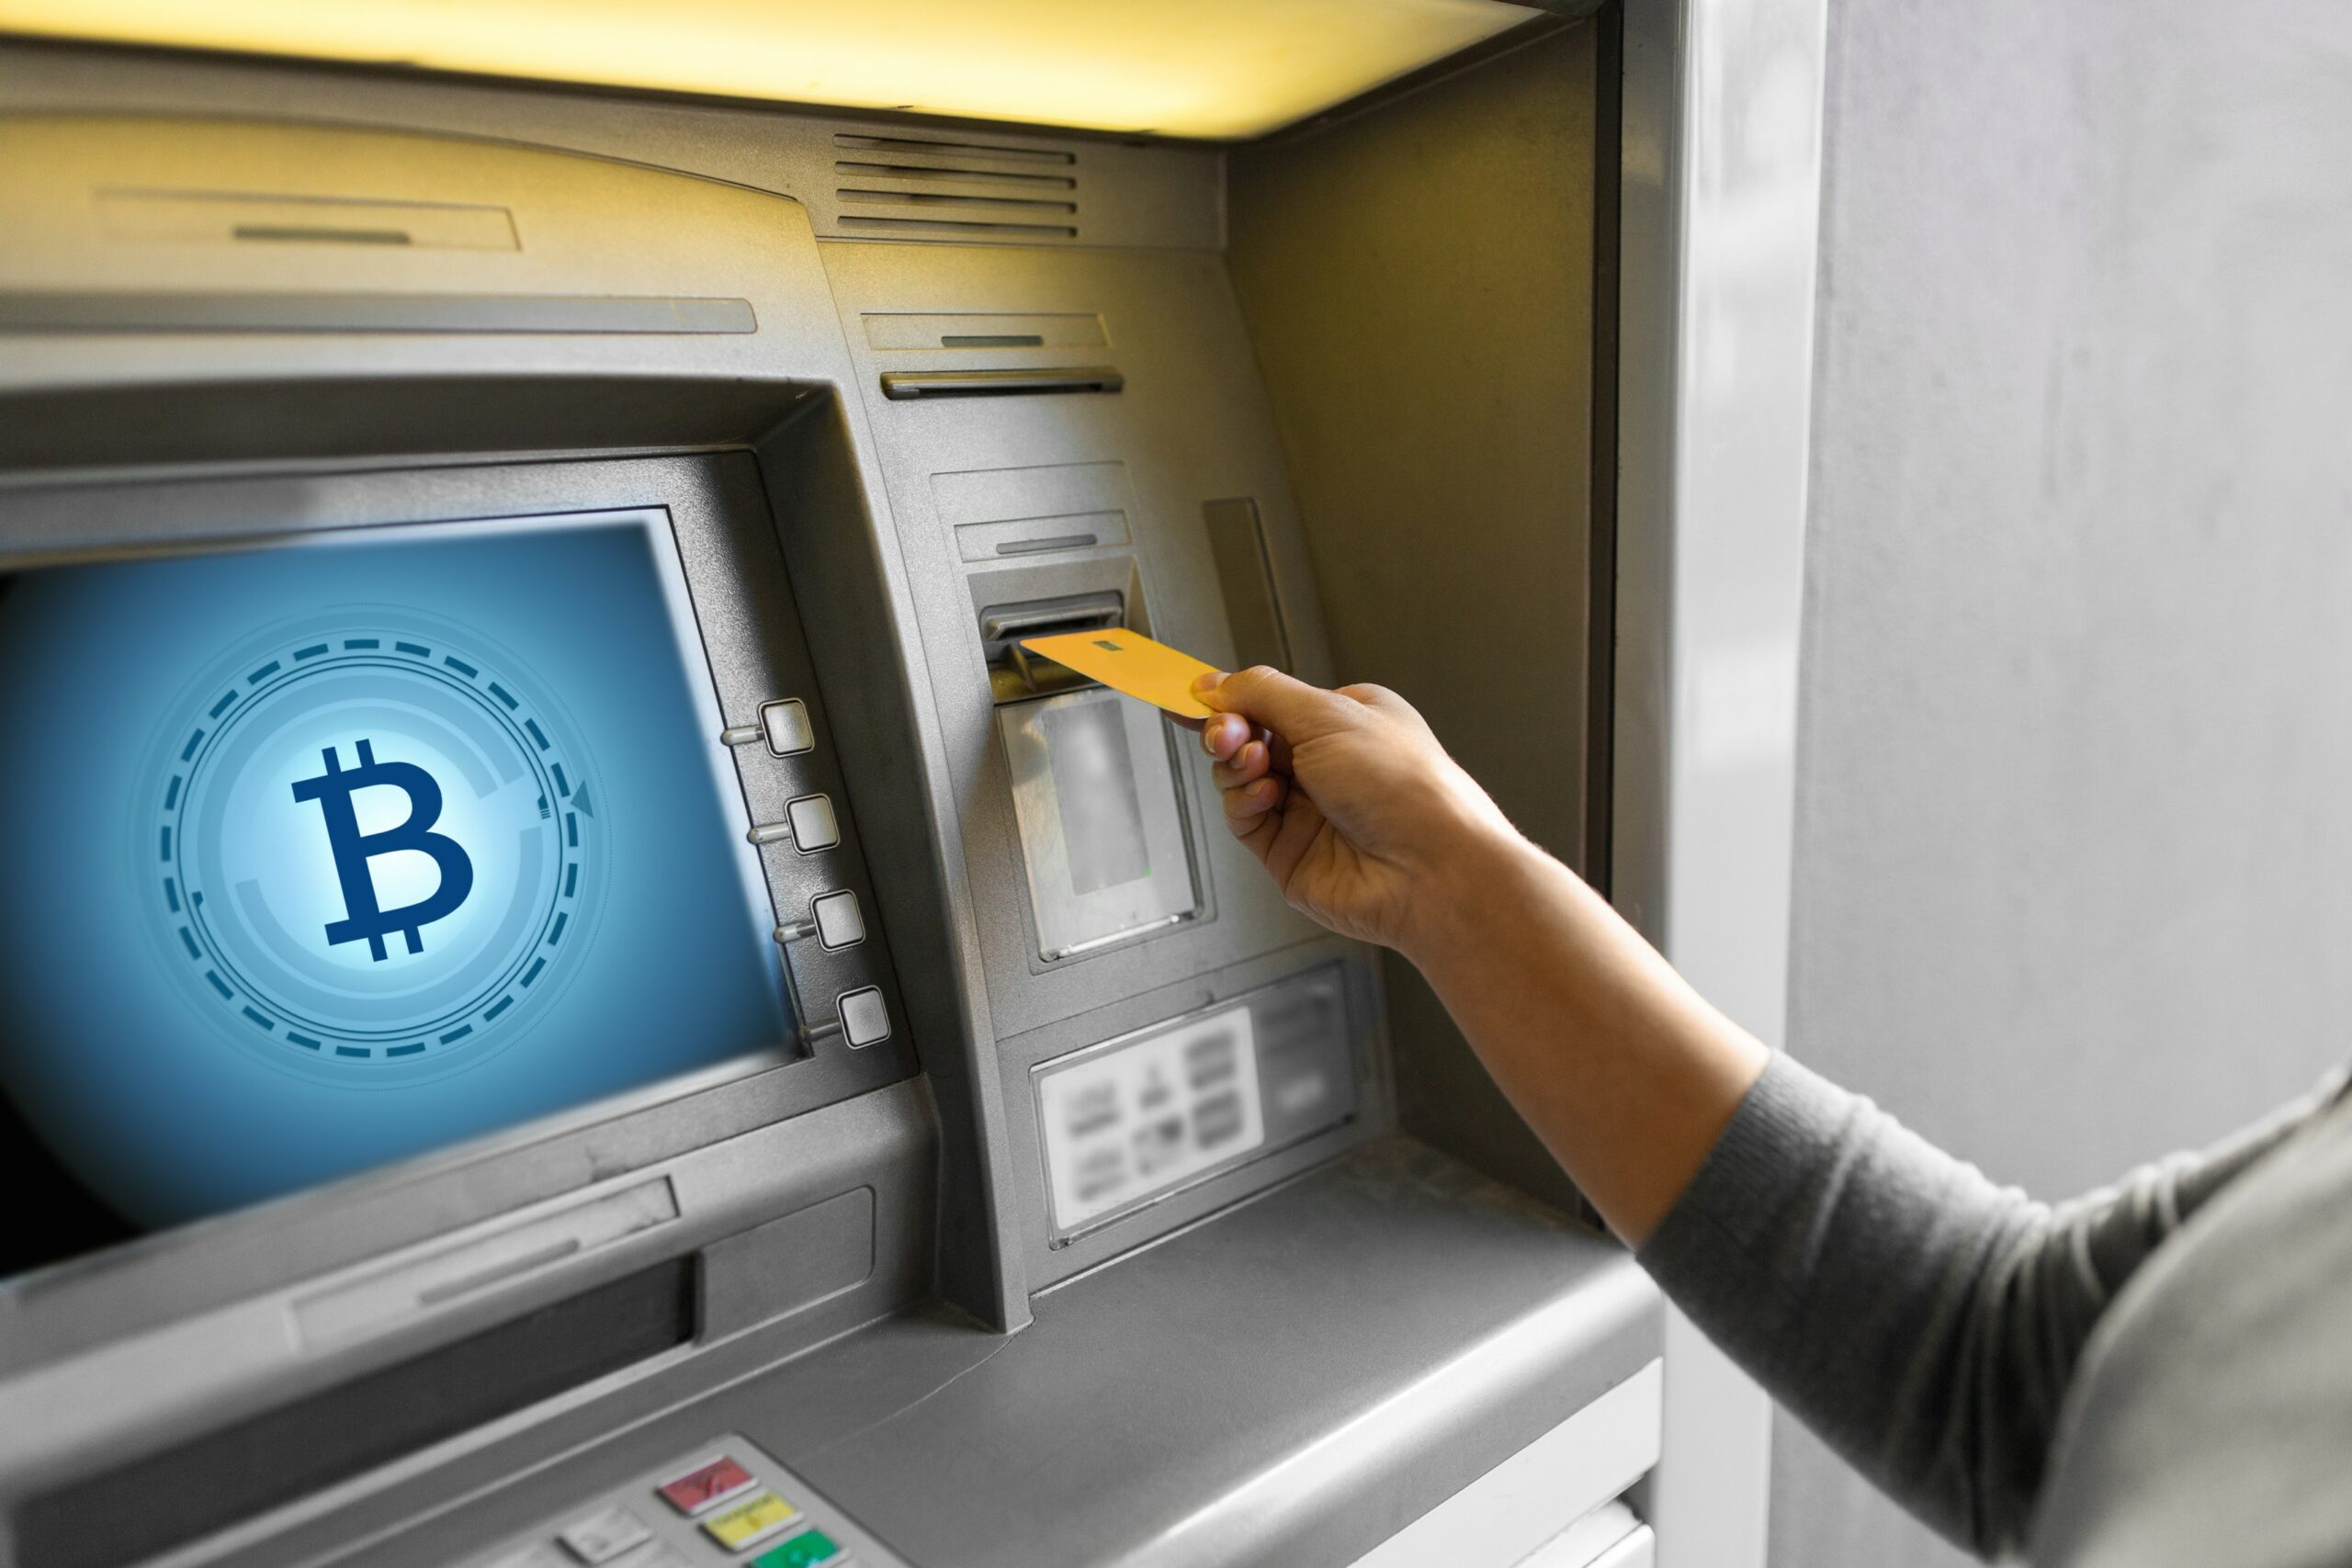 Learn How to Buy Bitcoin at a Bitcoin ATM Using Cash | Crypto Dispensers